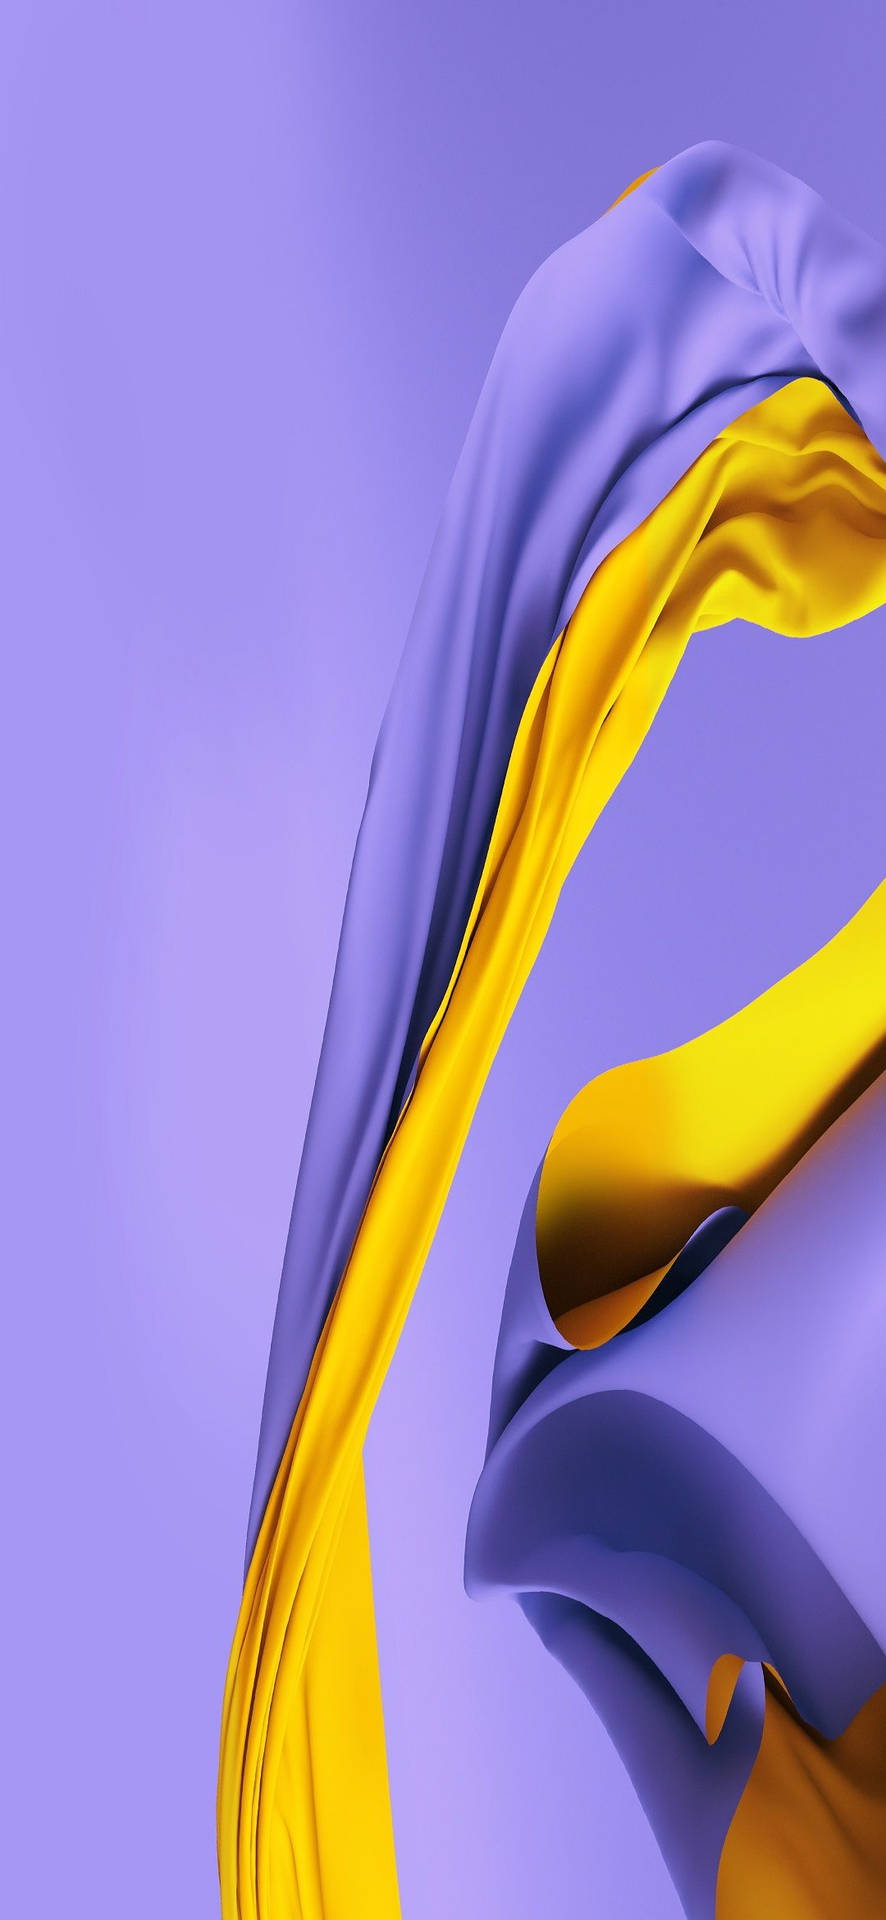 Download Purple And Yellow Samsung M31 Wallpaper 